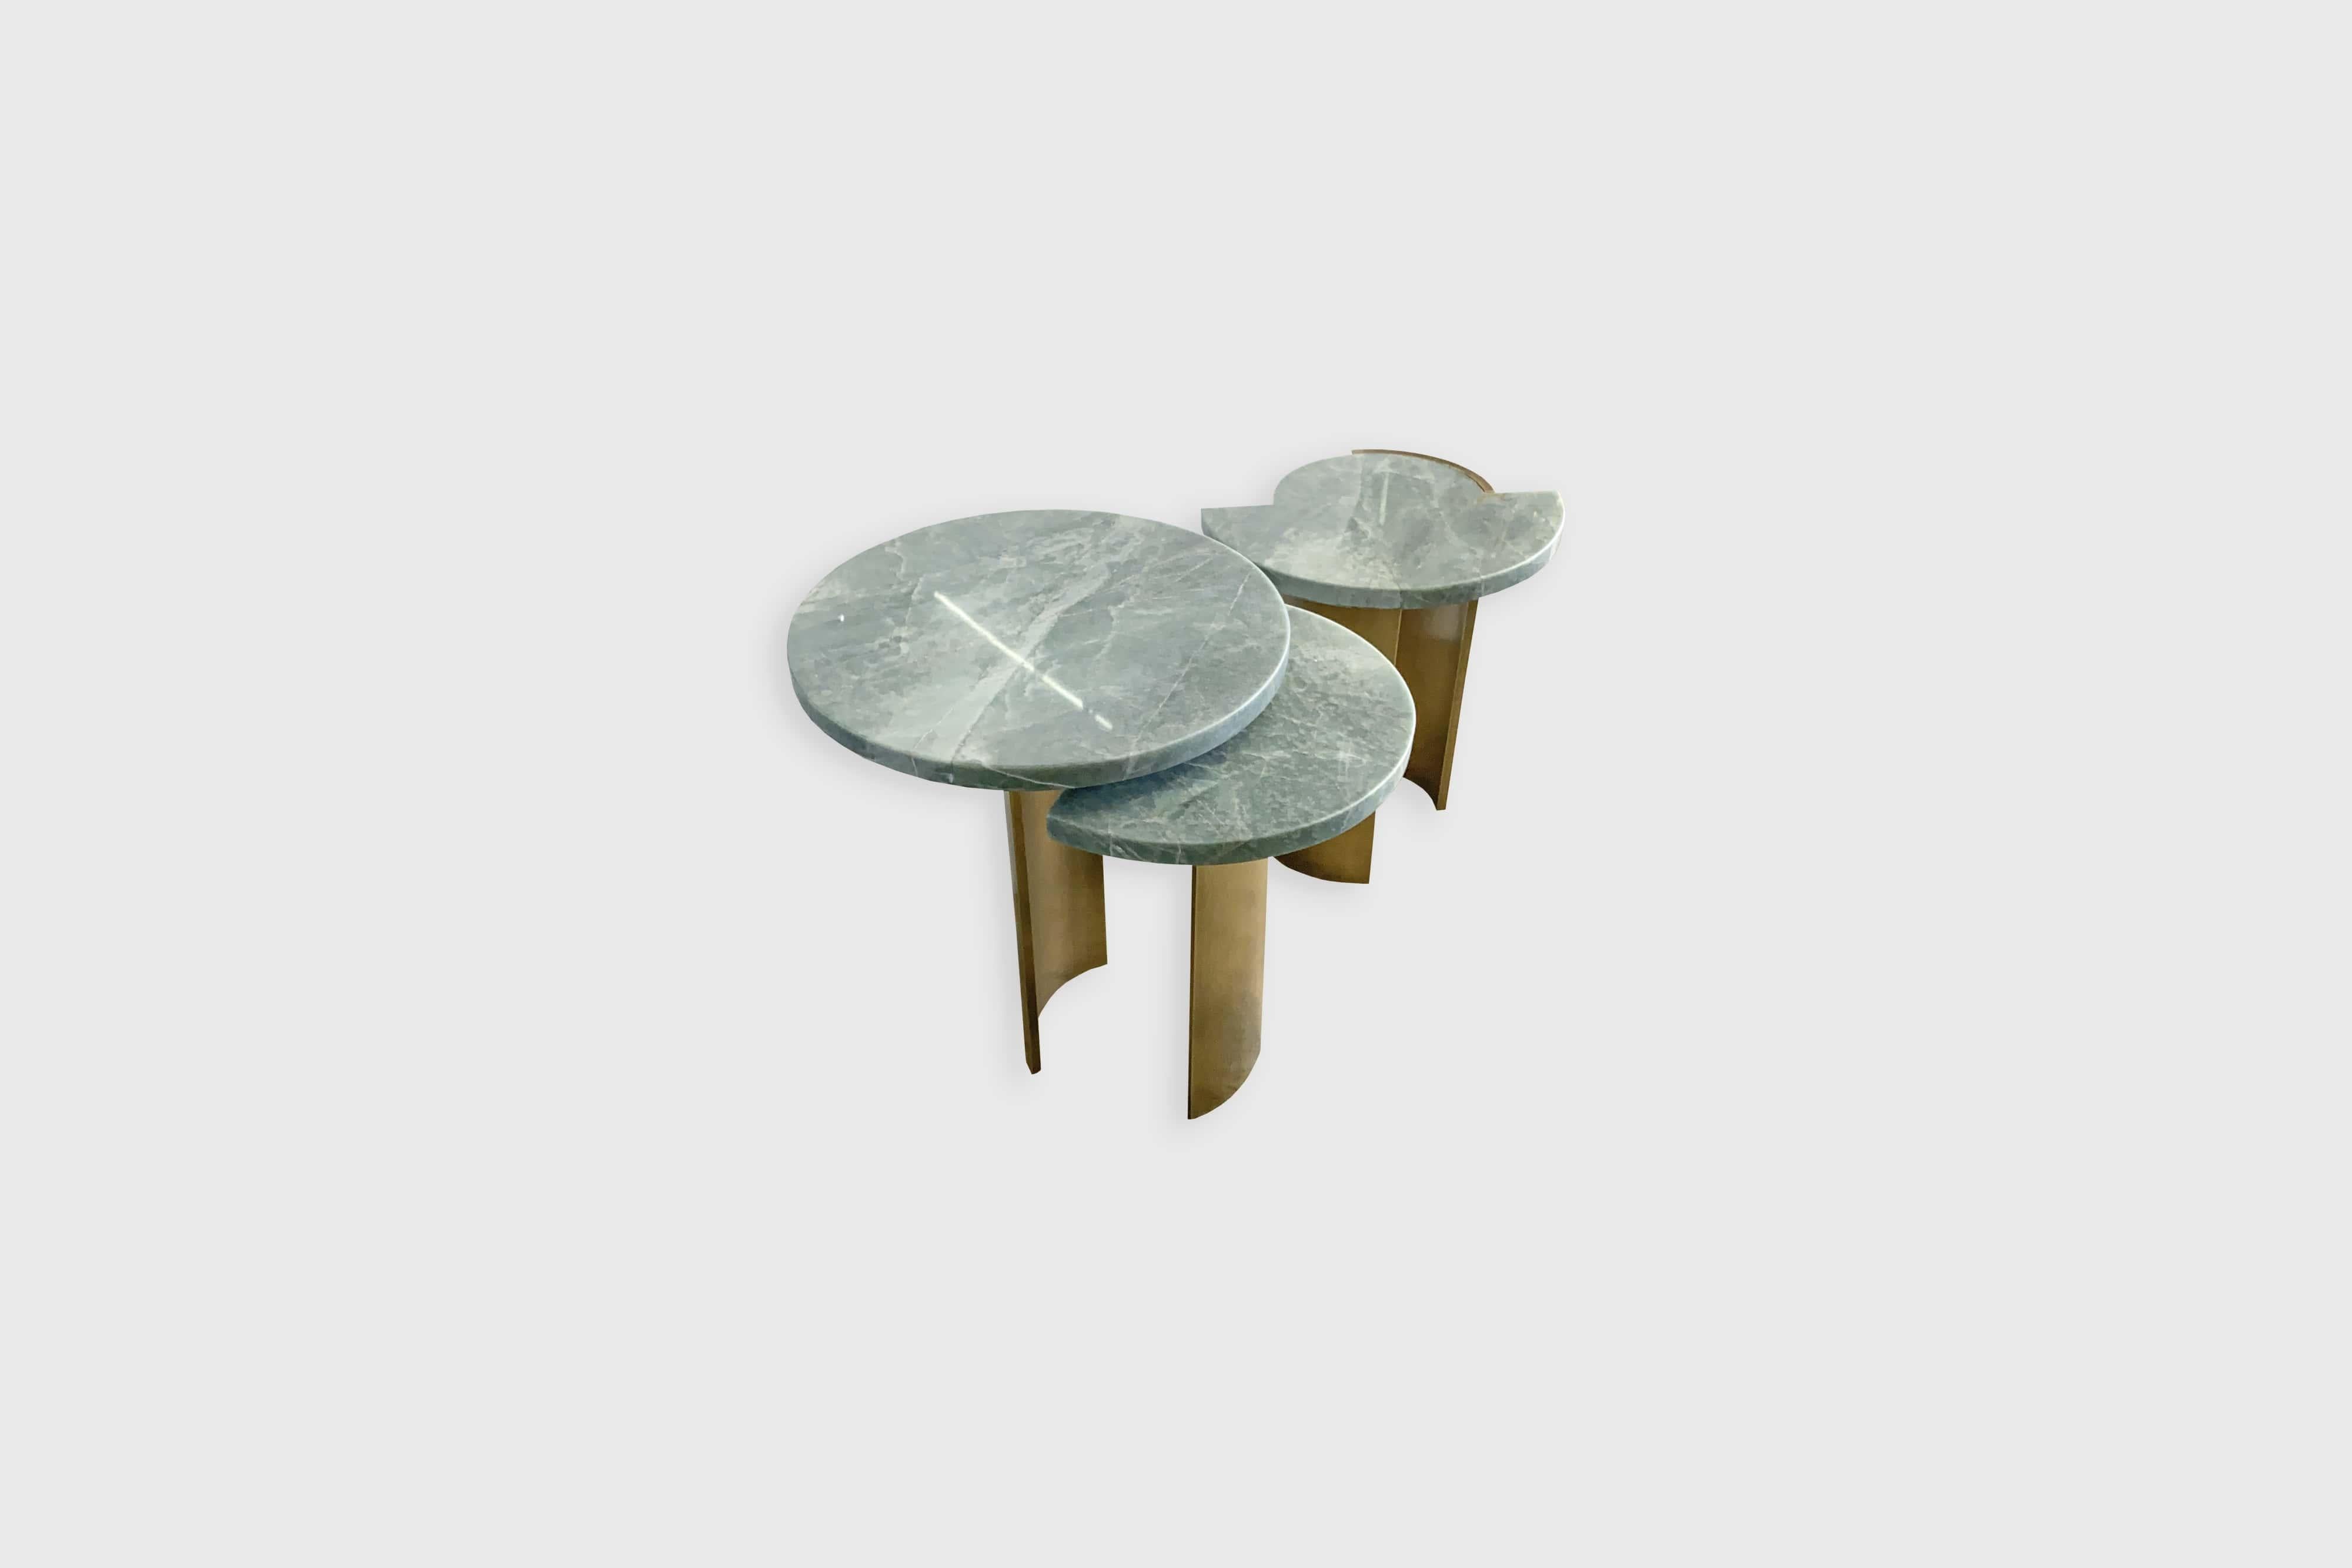 Starting price: $10,427

Symbol side table in stone.

Designed by Alexander Diaz Andersson

Piece 1
L 32.0cm/12.5”
W 26.5cm/10.4”
H 37.0cm/14.5”

Piece 2
L 36.0cm/14.1”
W 36.0cm/14.1”
H 41.0cm/16.1”

Stone Options:
Verde Tikal
Negro Monterrey
Silver